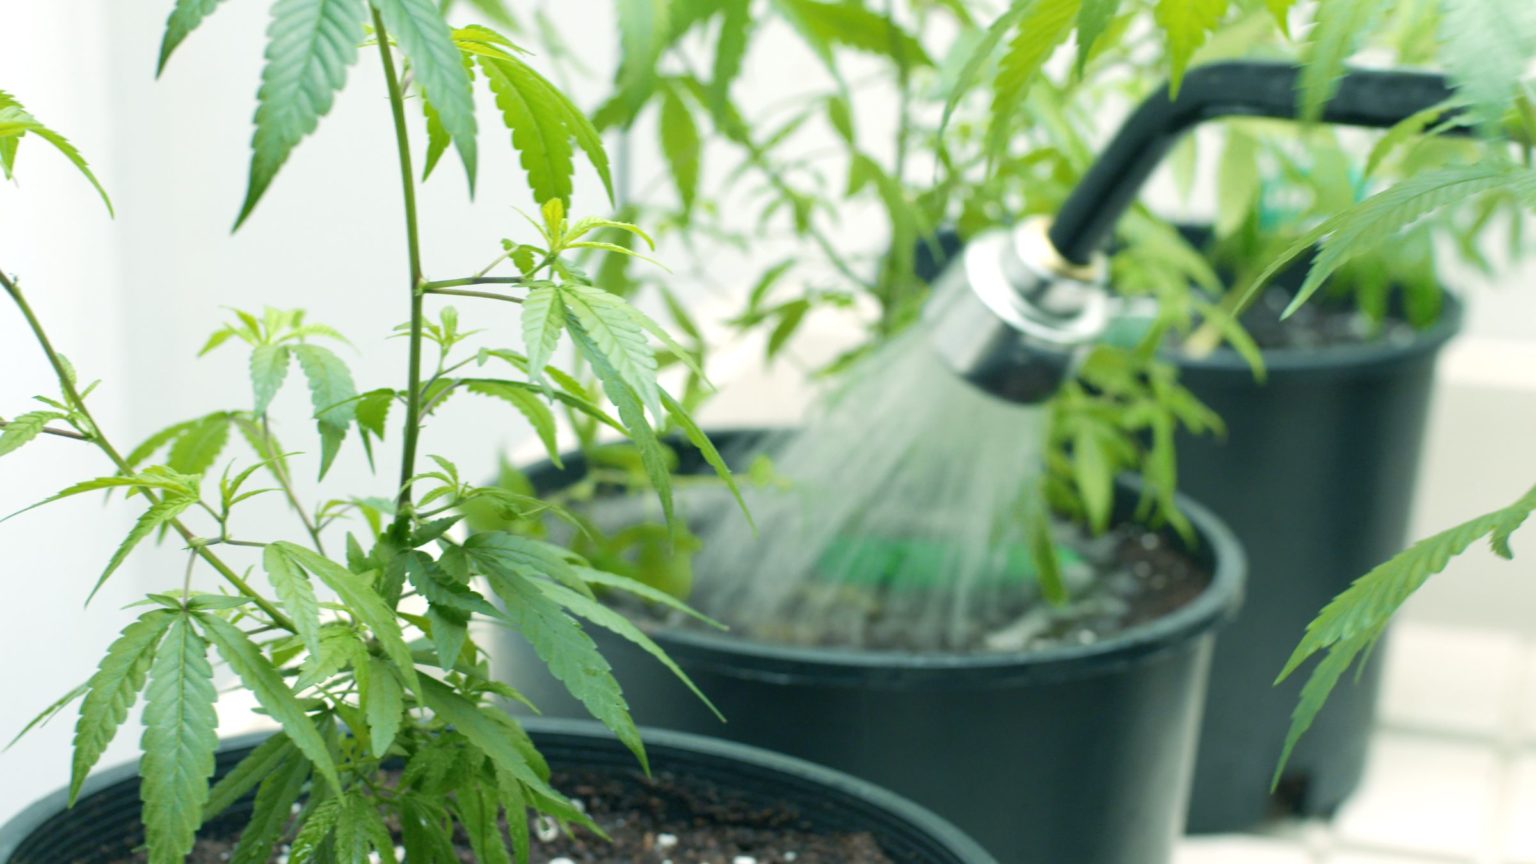 Florida-Based Startup Recycles AC Water For Cannabis Growers